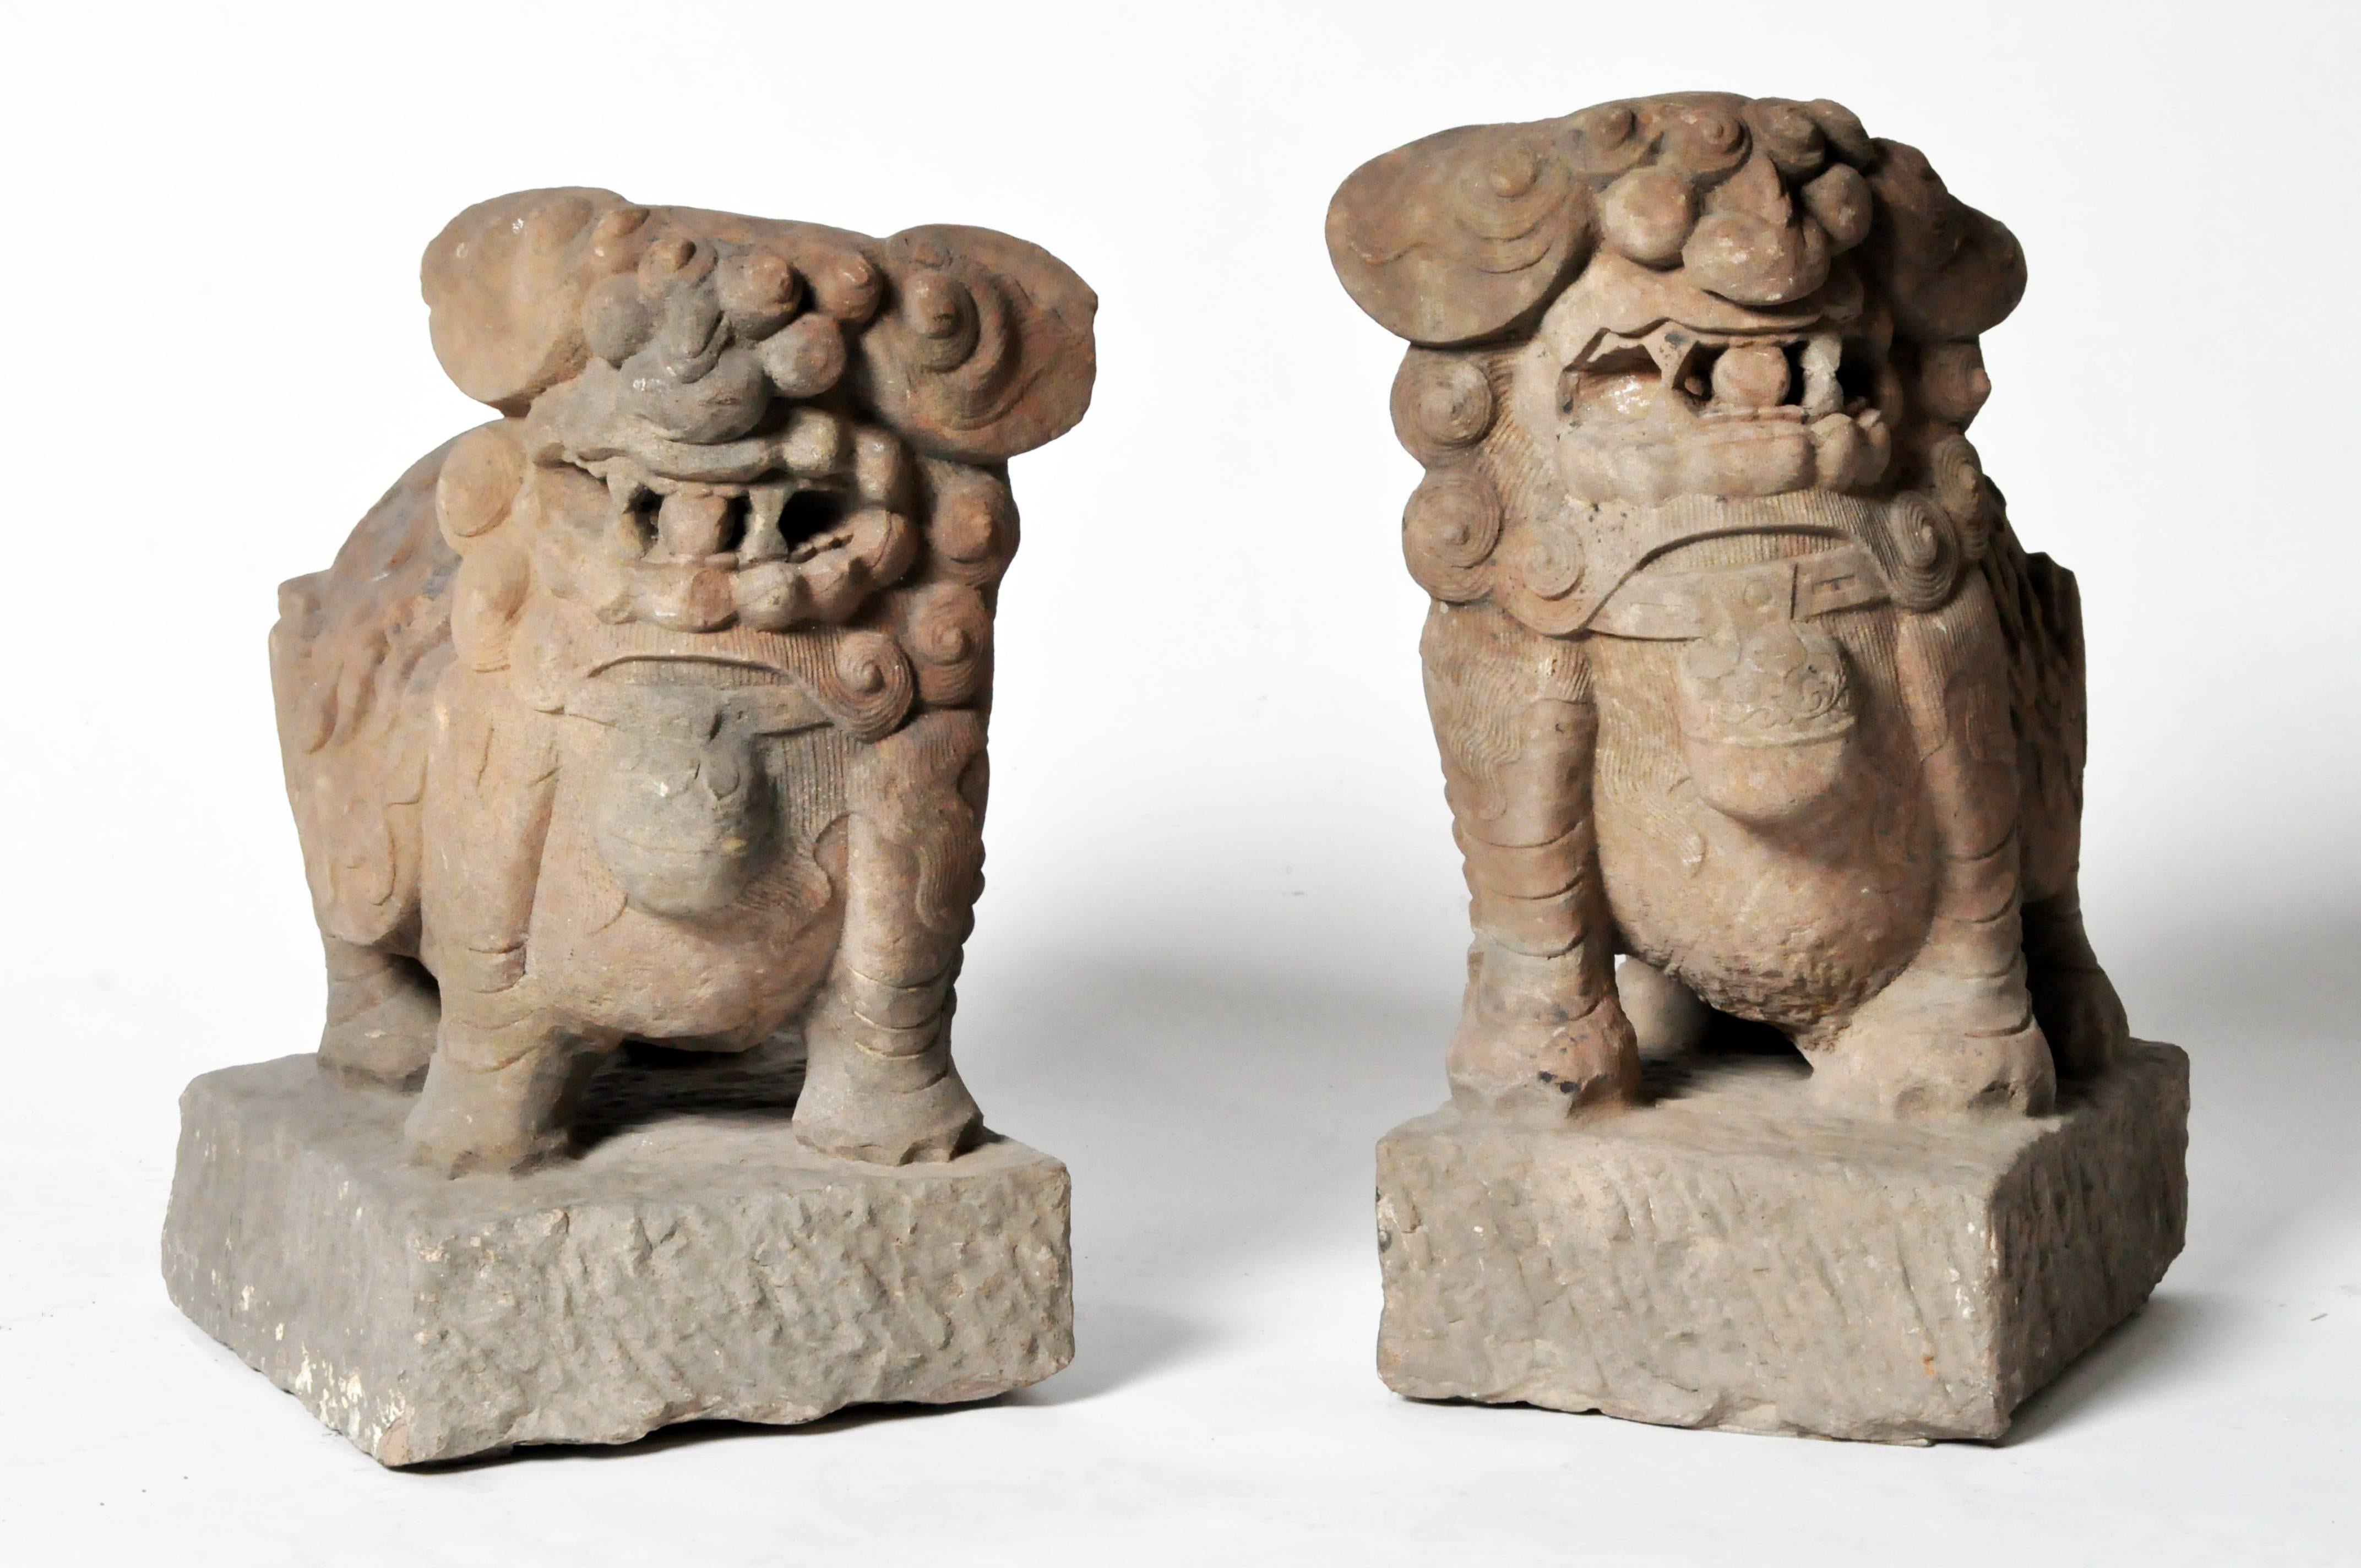 Often referred to as “Foo Dogs” or “Fu Dogs” in western culture, these handsome stone sentinels are iconic gatekeepers seen throughout Asia. Traditional symbols of protection, they are made from durable materials like bronze or stone and are